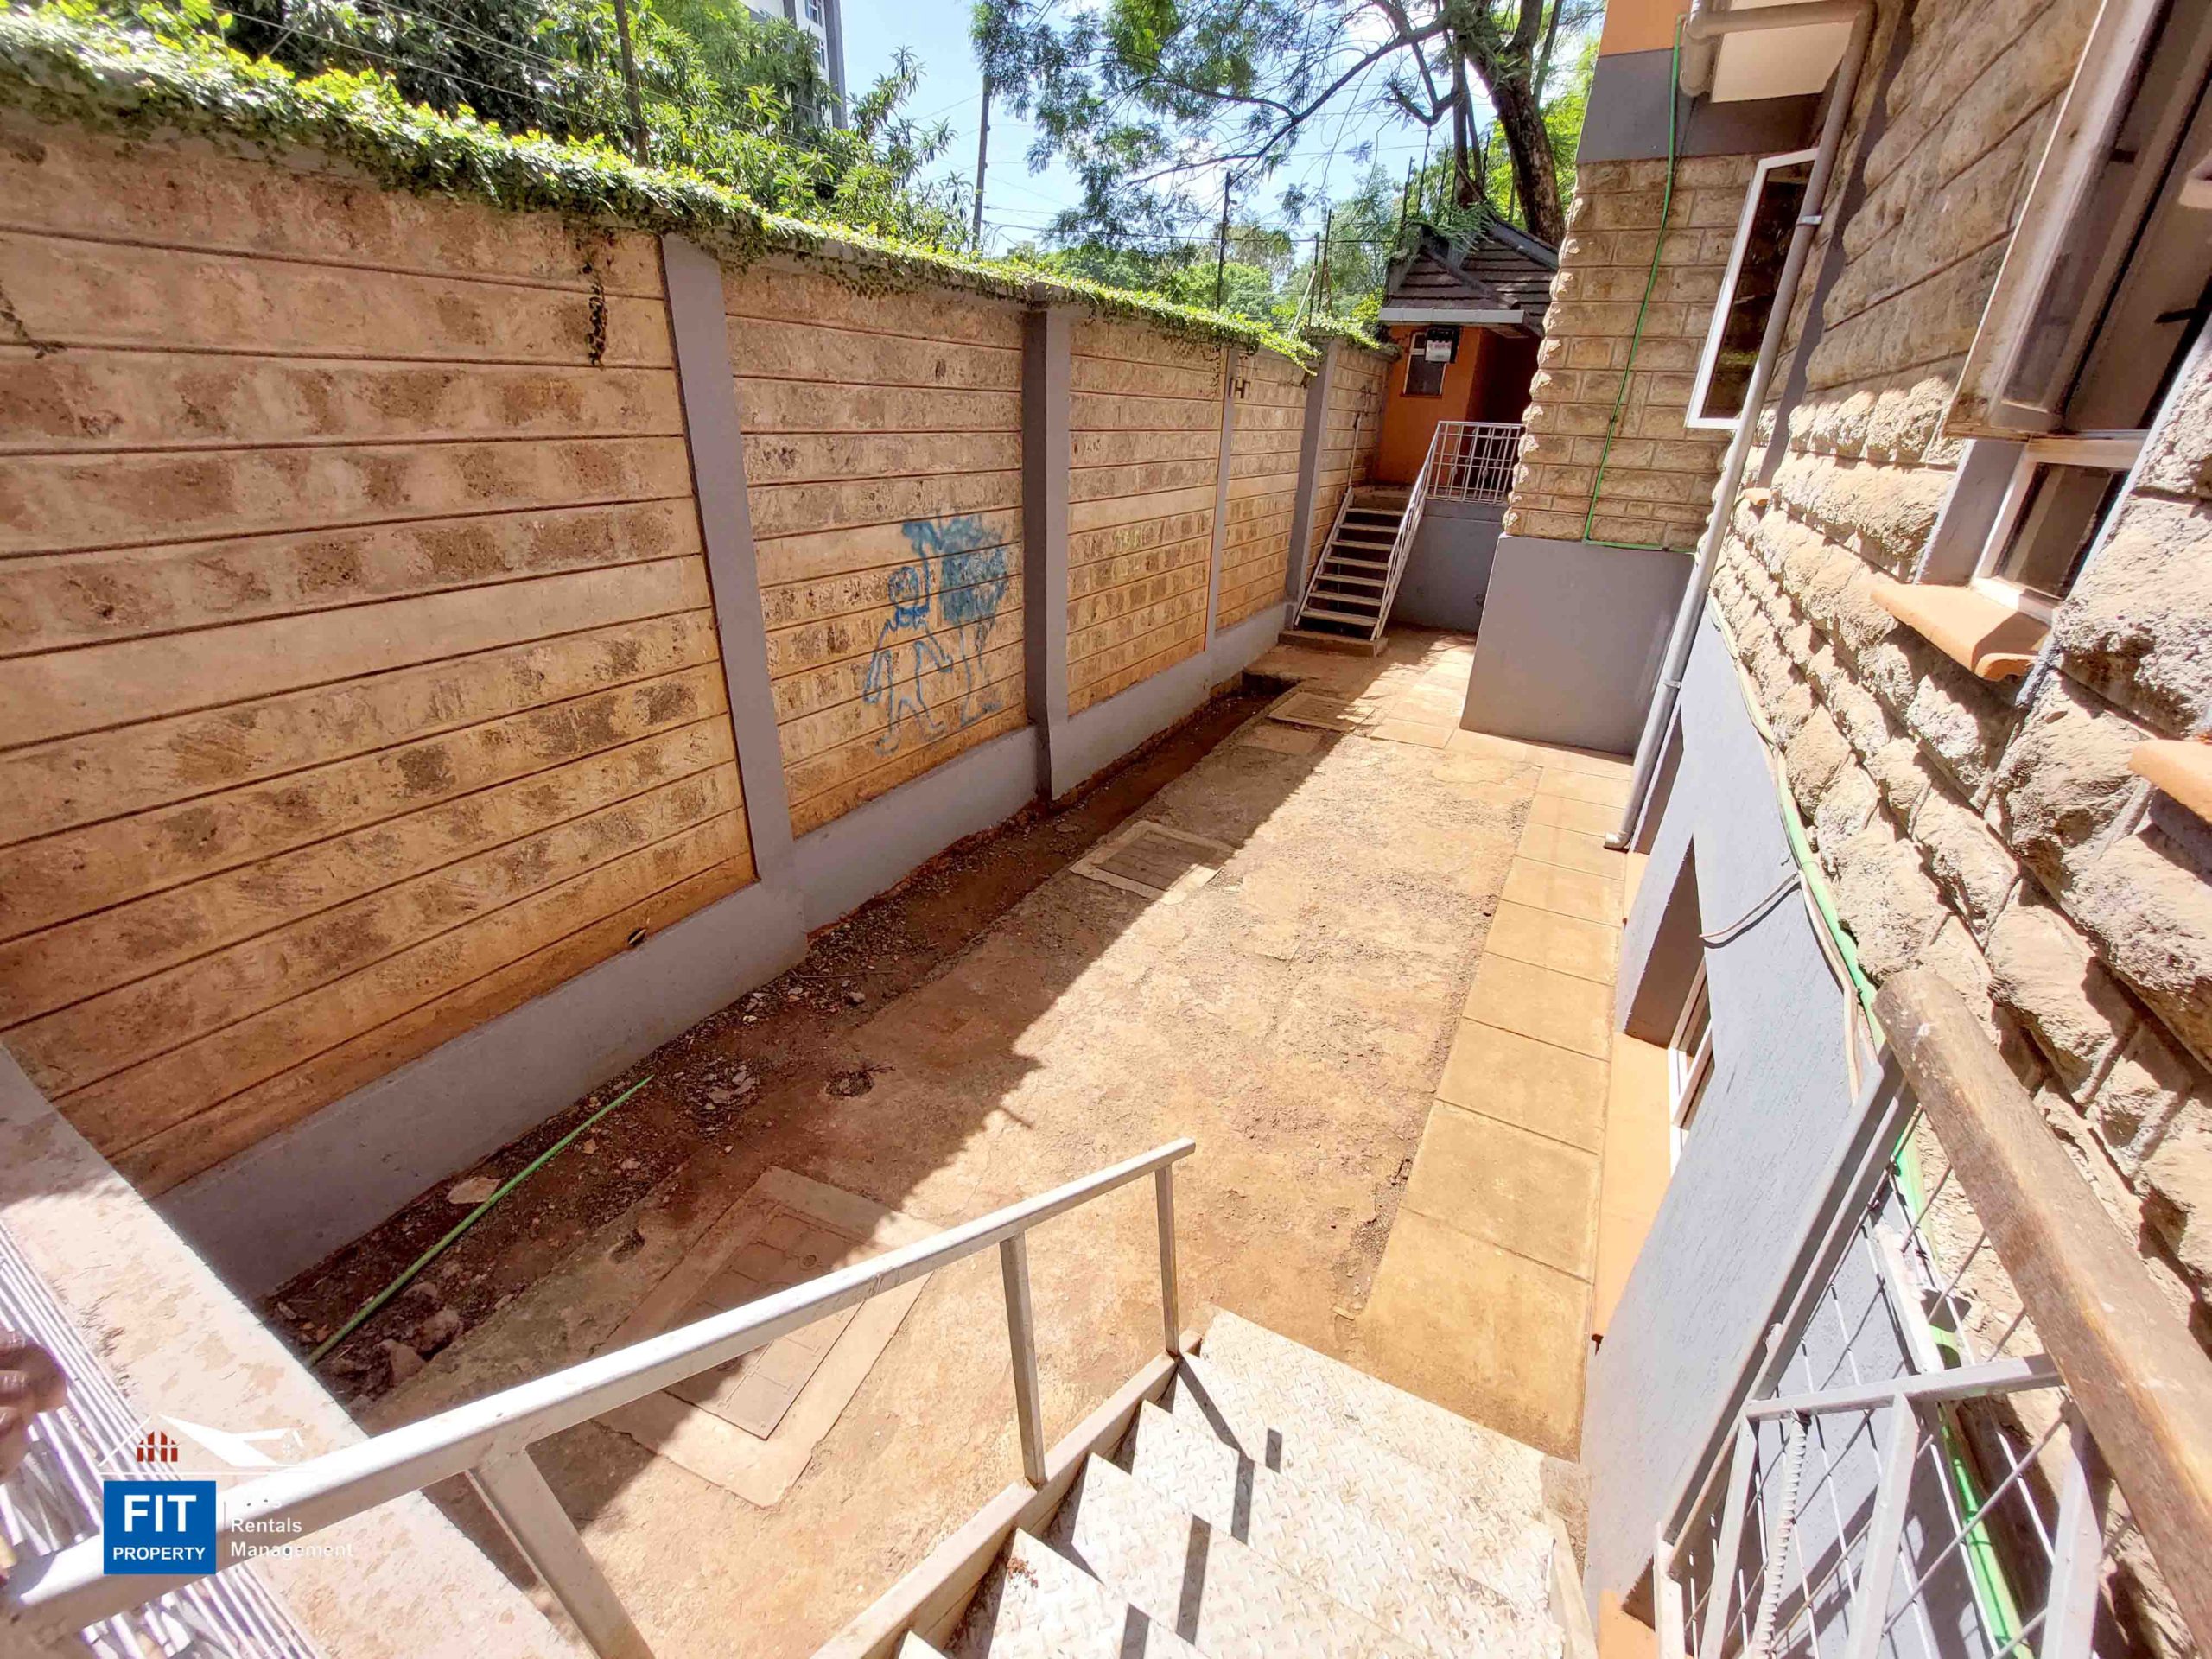 6 Bedroom House Riverside For Sale - Nairobi close to Westlands shopping center, various Embassies, and offices. FIT PROPERTY